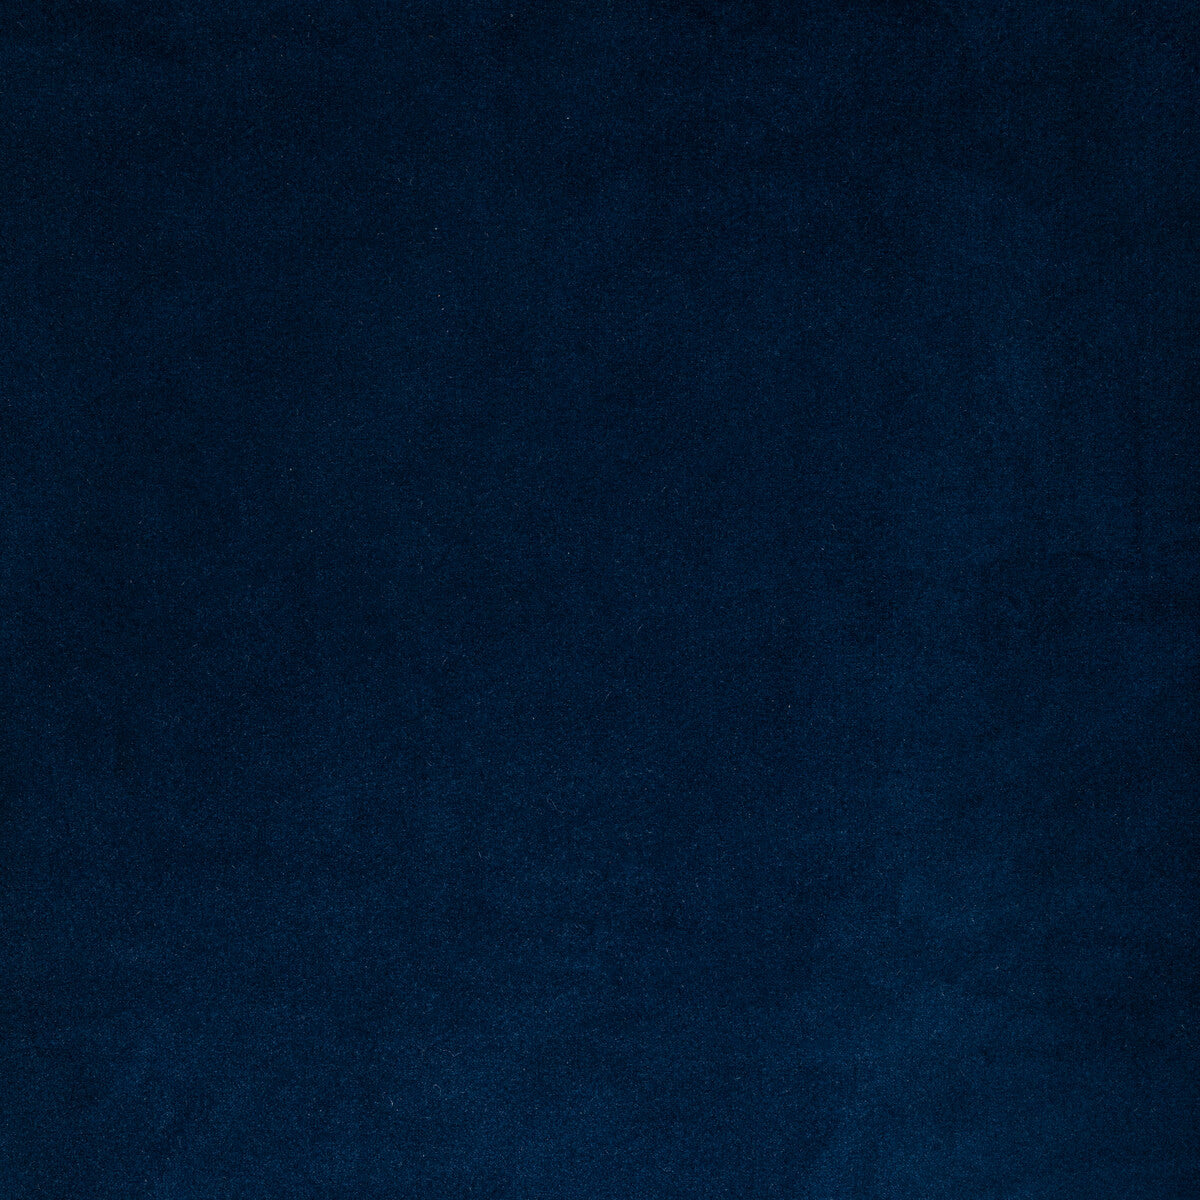 Rocco Velvet fabric in cobalt color - pattern 36652.50.0 - by Kravet Contract